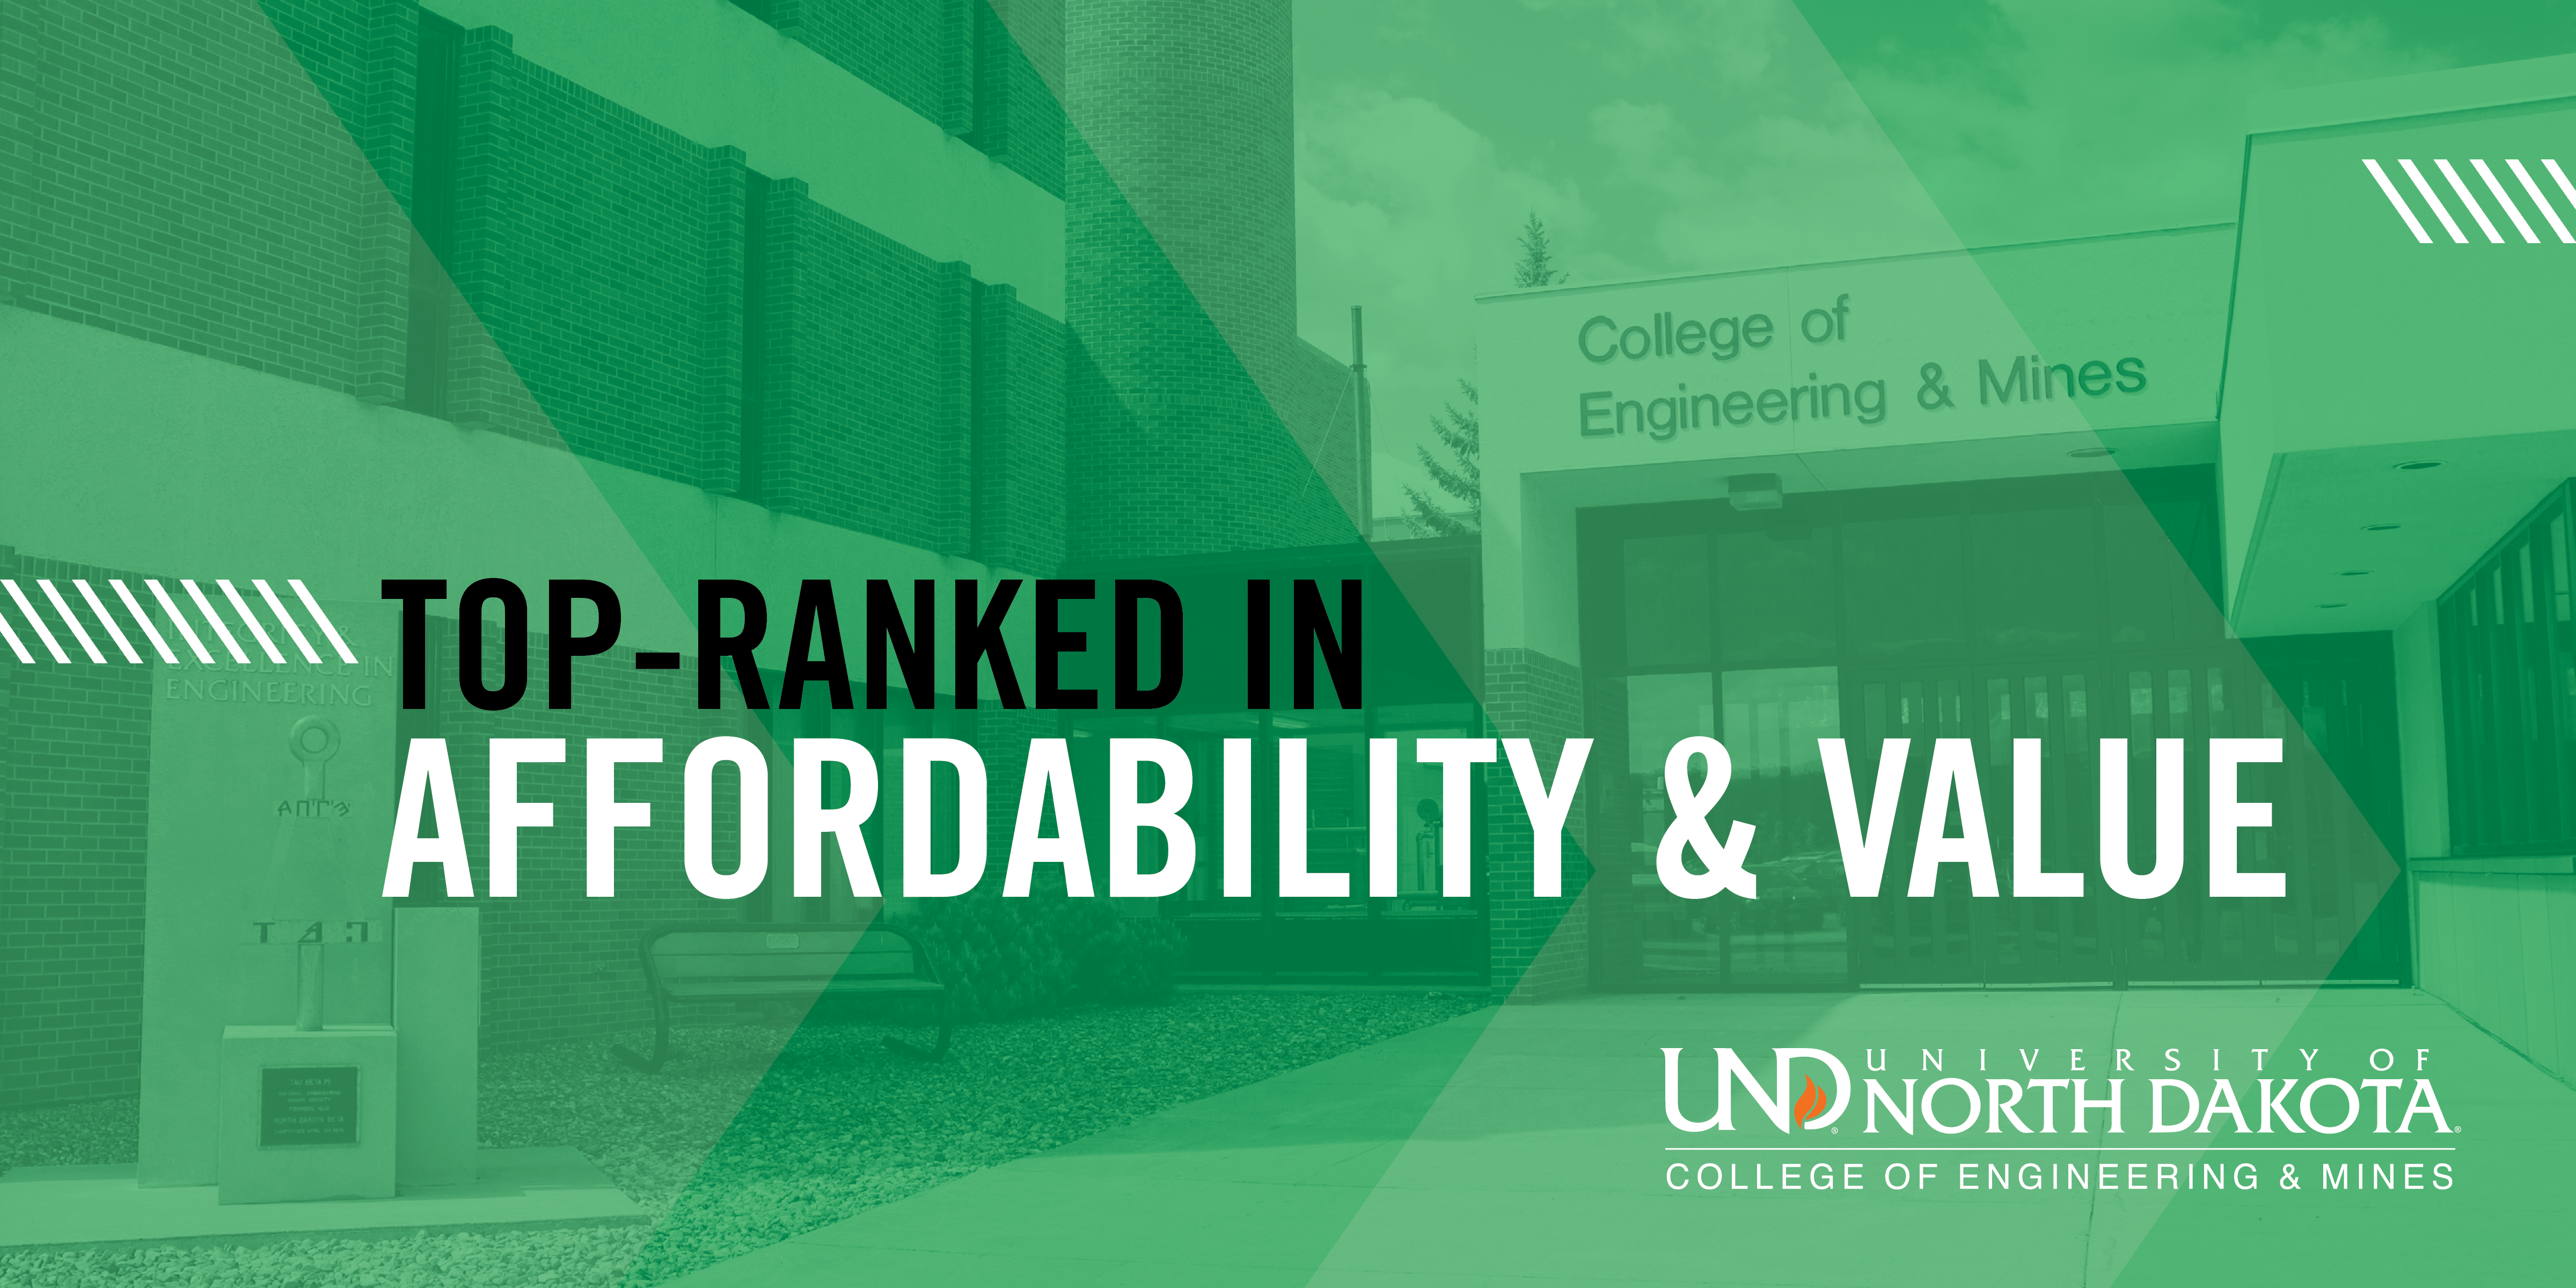 UND is top-ranked in affordability and value.